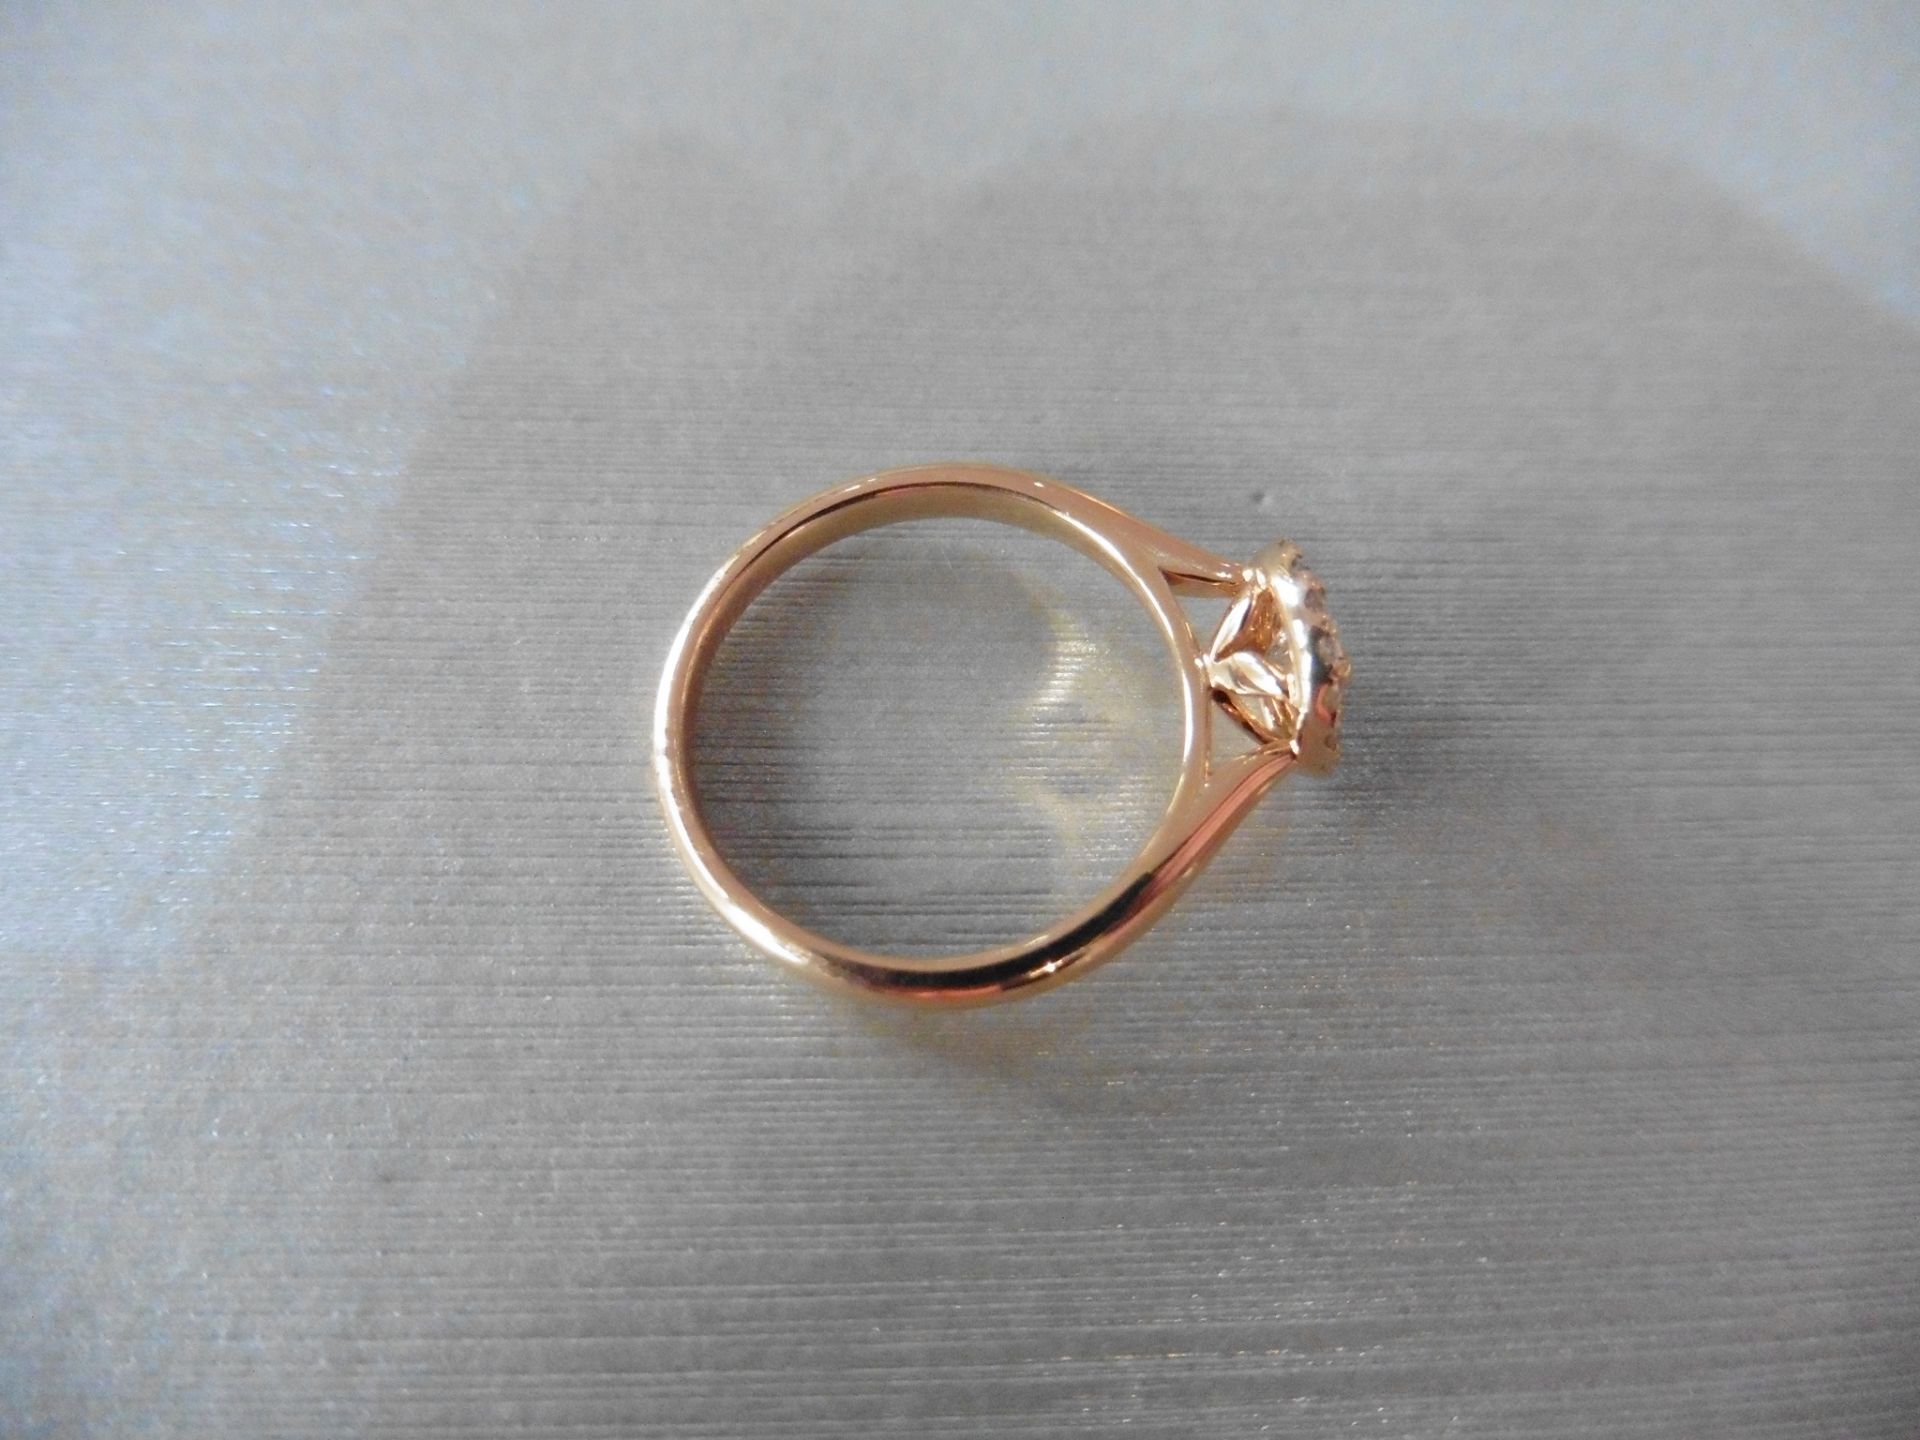 Brand new 18ct rose gold diamond set ring with a 0.30ct brilliant cut diamond, I/J colour which is - Image 3 of 4